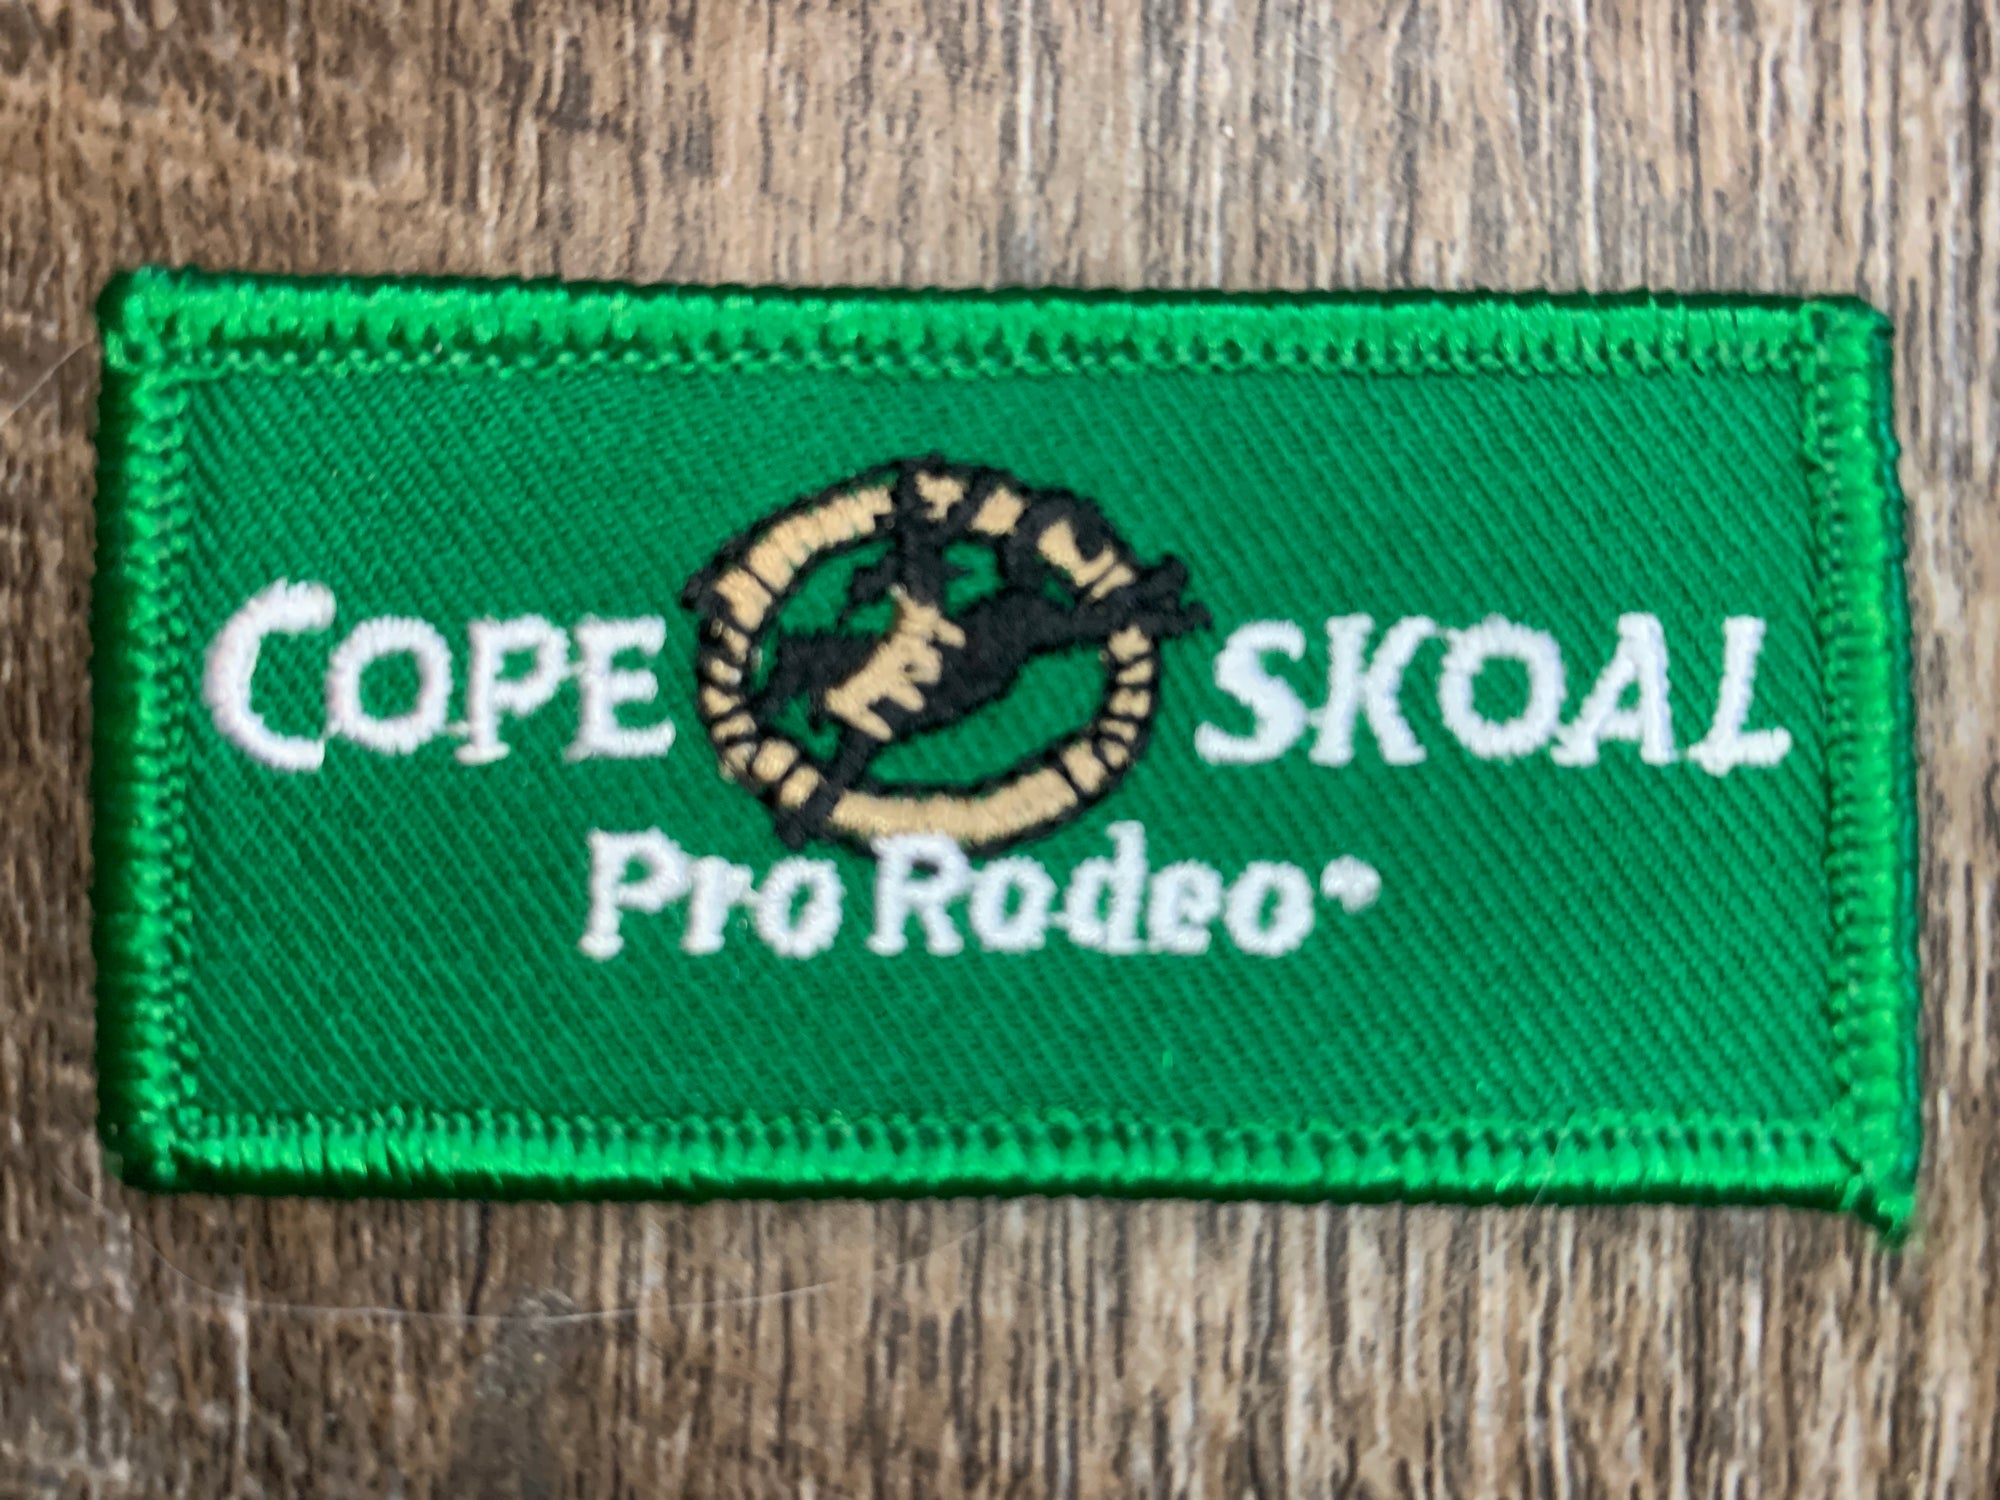 Skoal Cope- Pro Rodeo